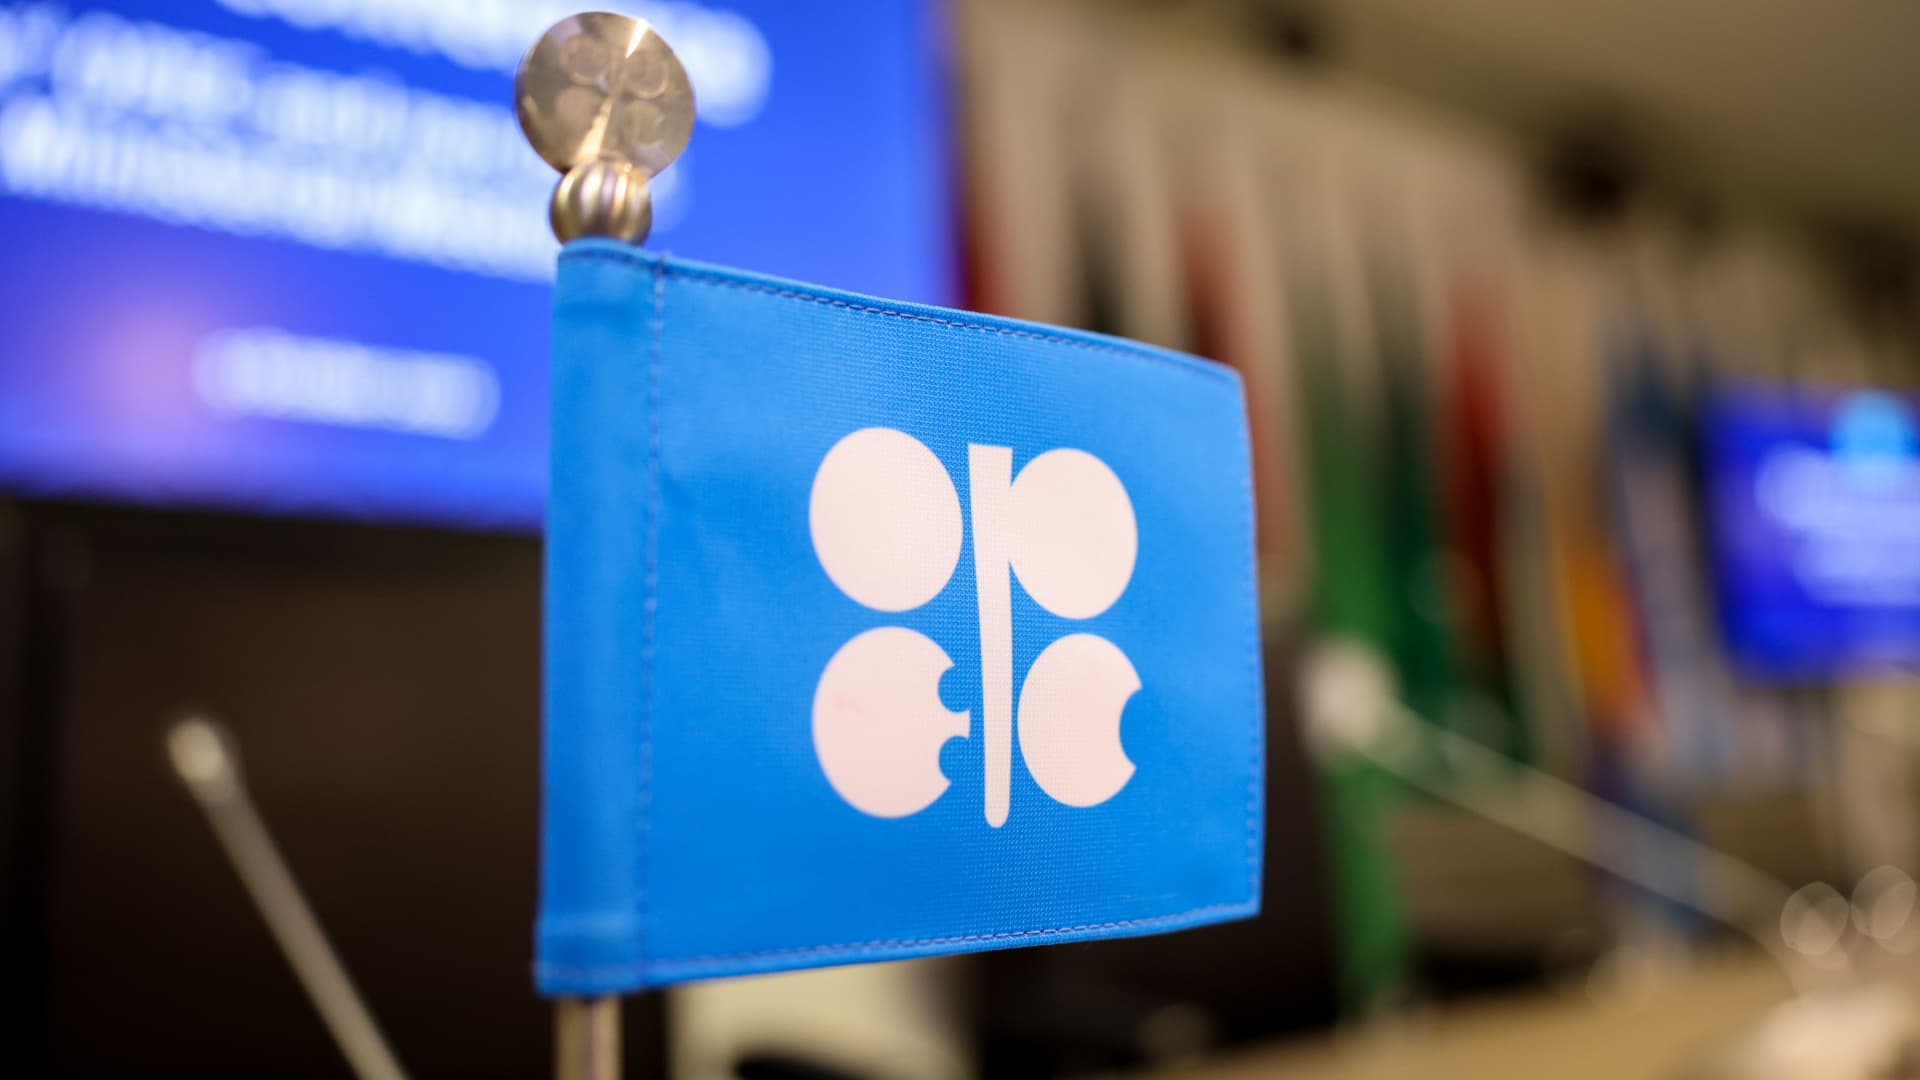 OPEC+ to cut oil production by 2 million barrels per day to shore up prices, defying U.S. pressure